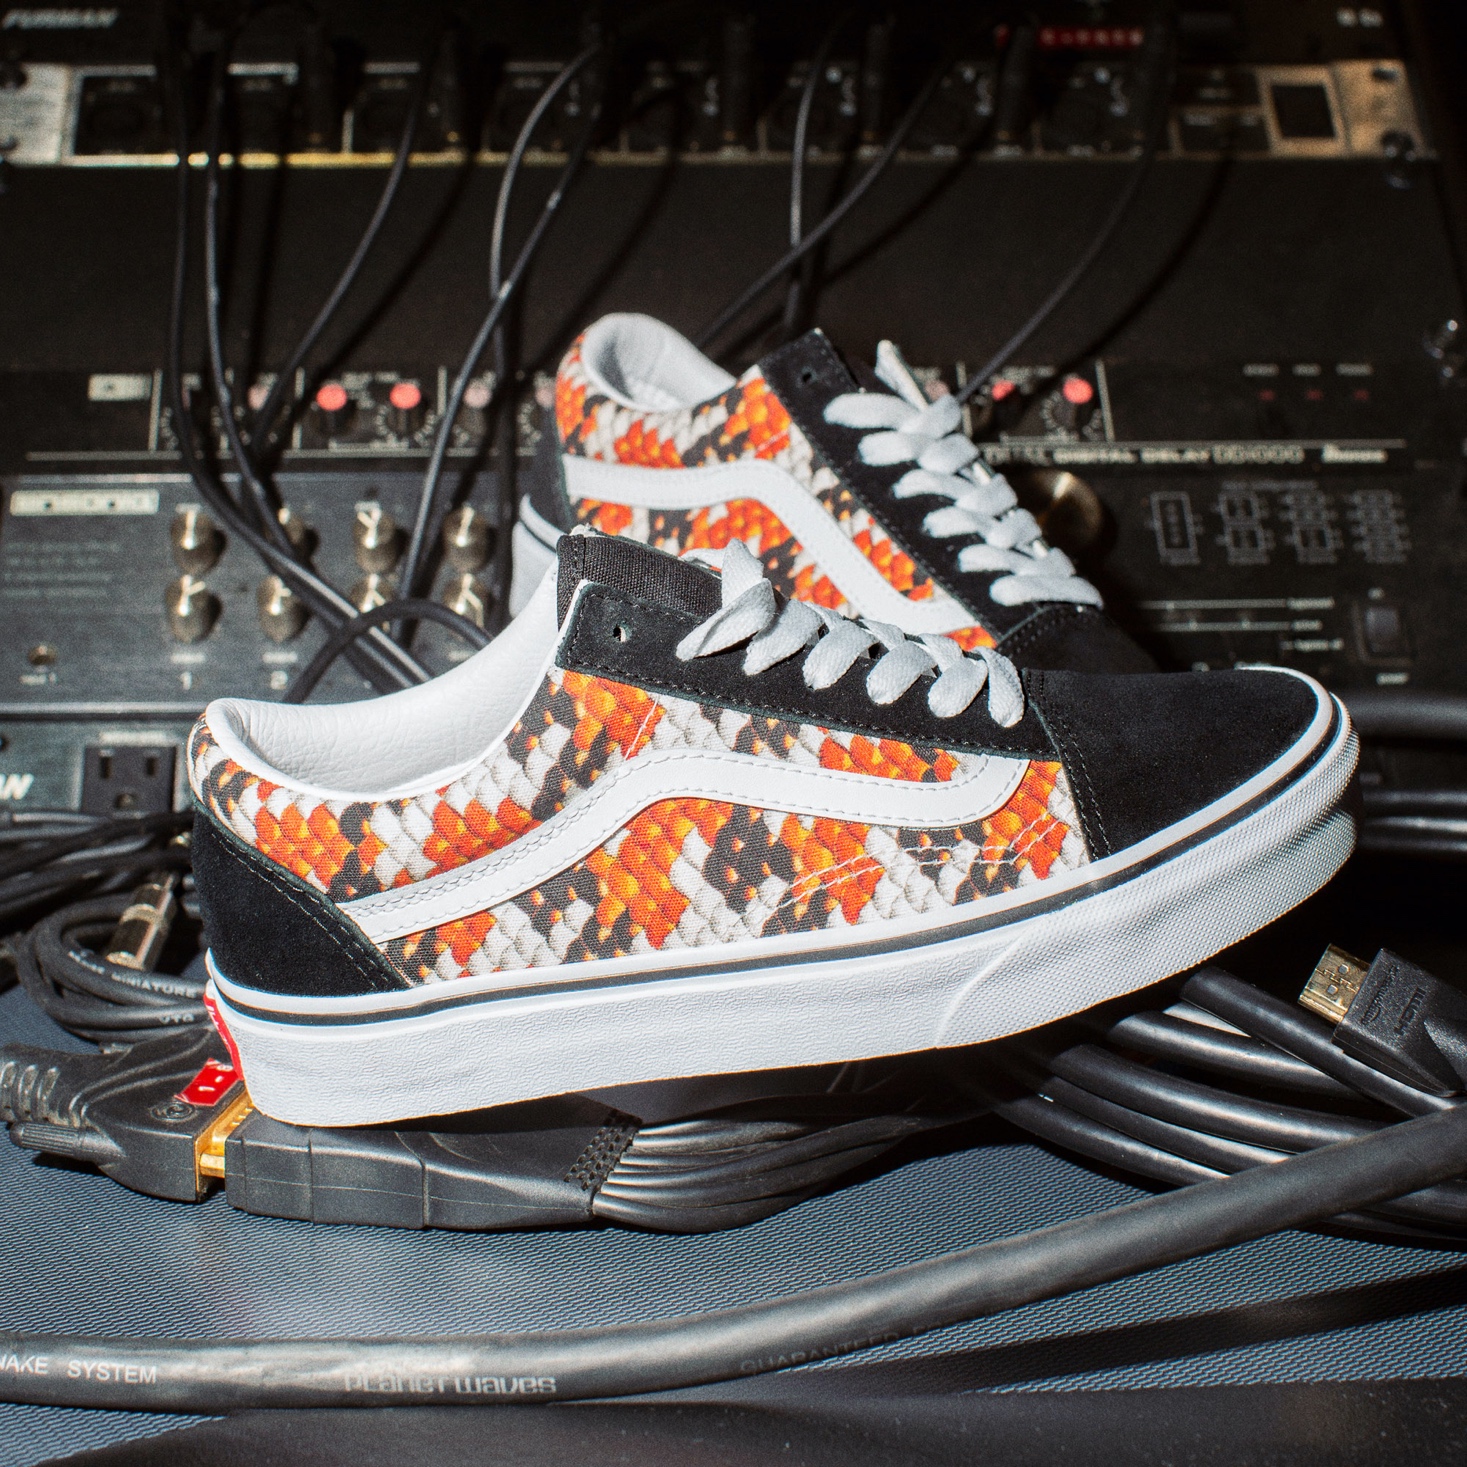 Vans Celebrates Creativity and Artists that Make Their Own Lane with Custom Made Old Skools Designed Denzel Curry and CHIKA - RESPECT.